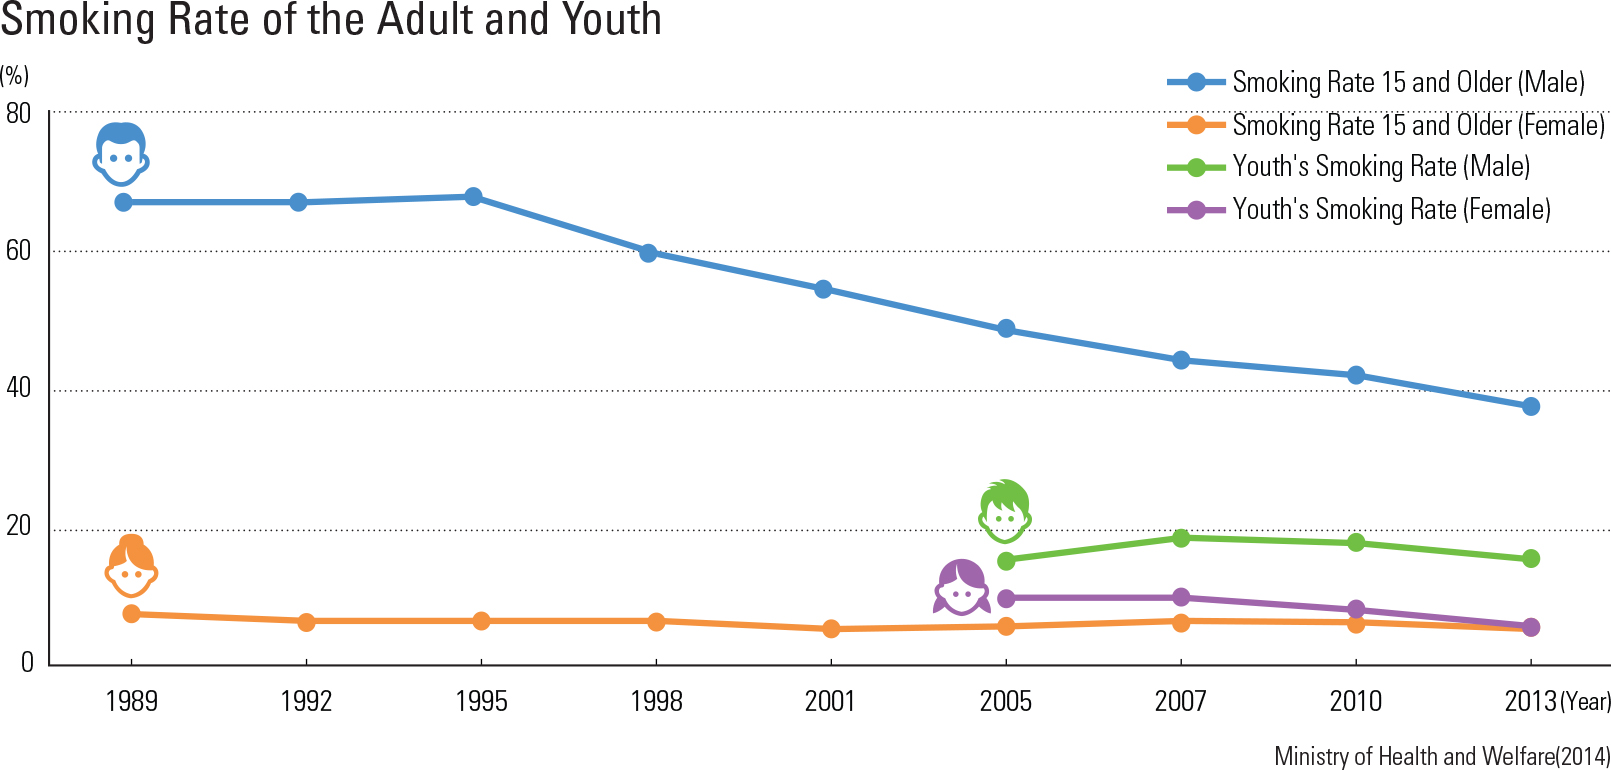 Smoking Rate of the Adult and Youth<p class="oz_zoom" zimg="http://imagedata.cafe24.com/us_3/us3_234-3_2.jpg"><span style="font-family:Nanum Myeongjo;"><span style="font-size:18px;"><span class="label label-danger">UPDATE DATA</span></span></p>